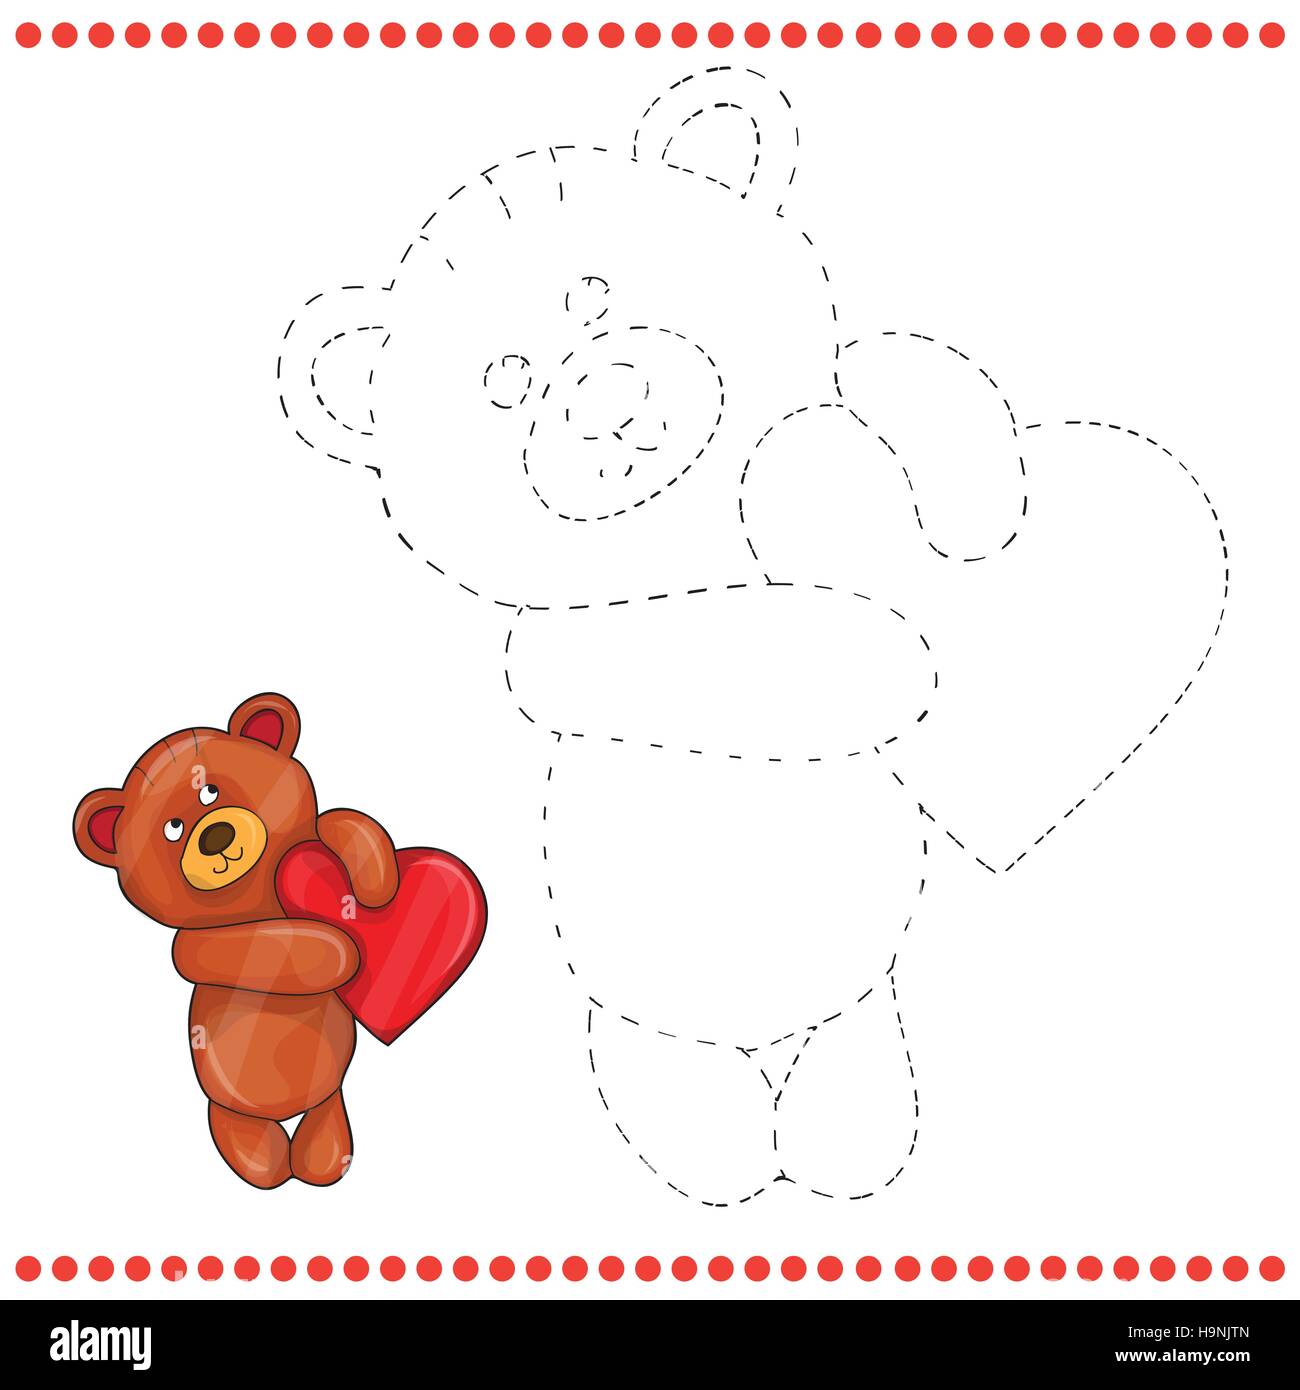 Connect the dots and coloring page - teddy bear Stock Vector Image